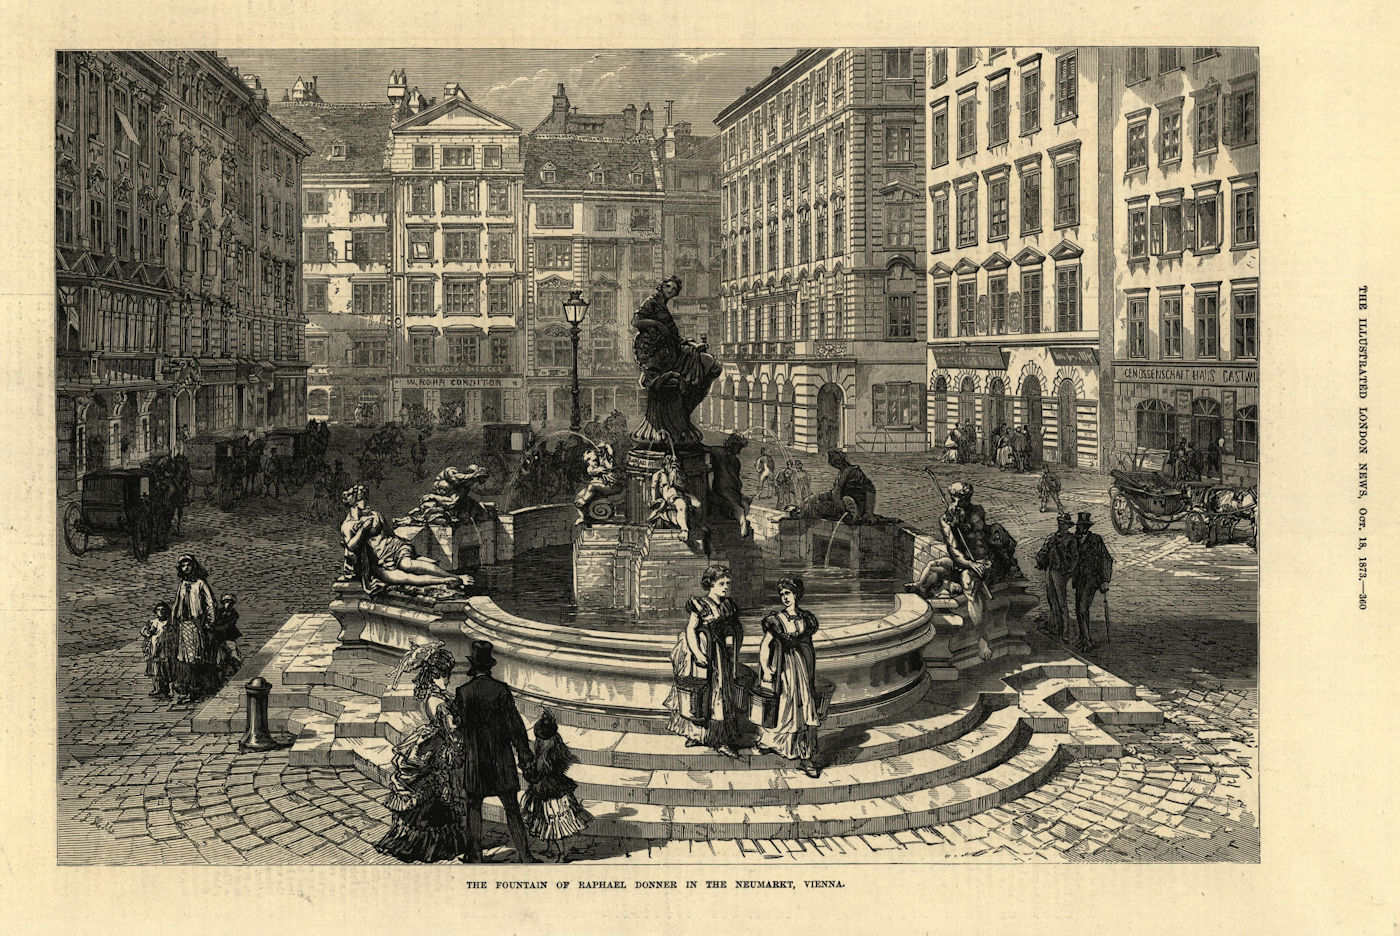 Associate Product The fountain of Raphael Donner in the Neumarkt, Vienna. Austria 1873 old print